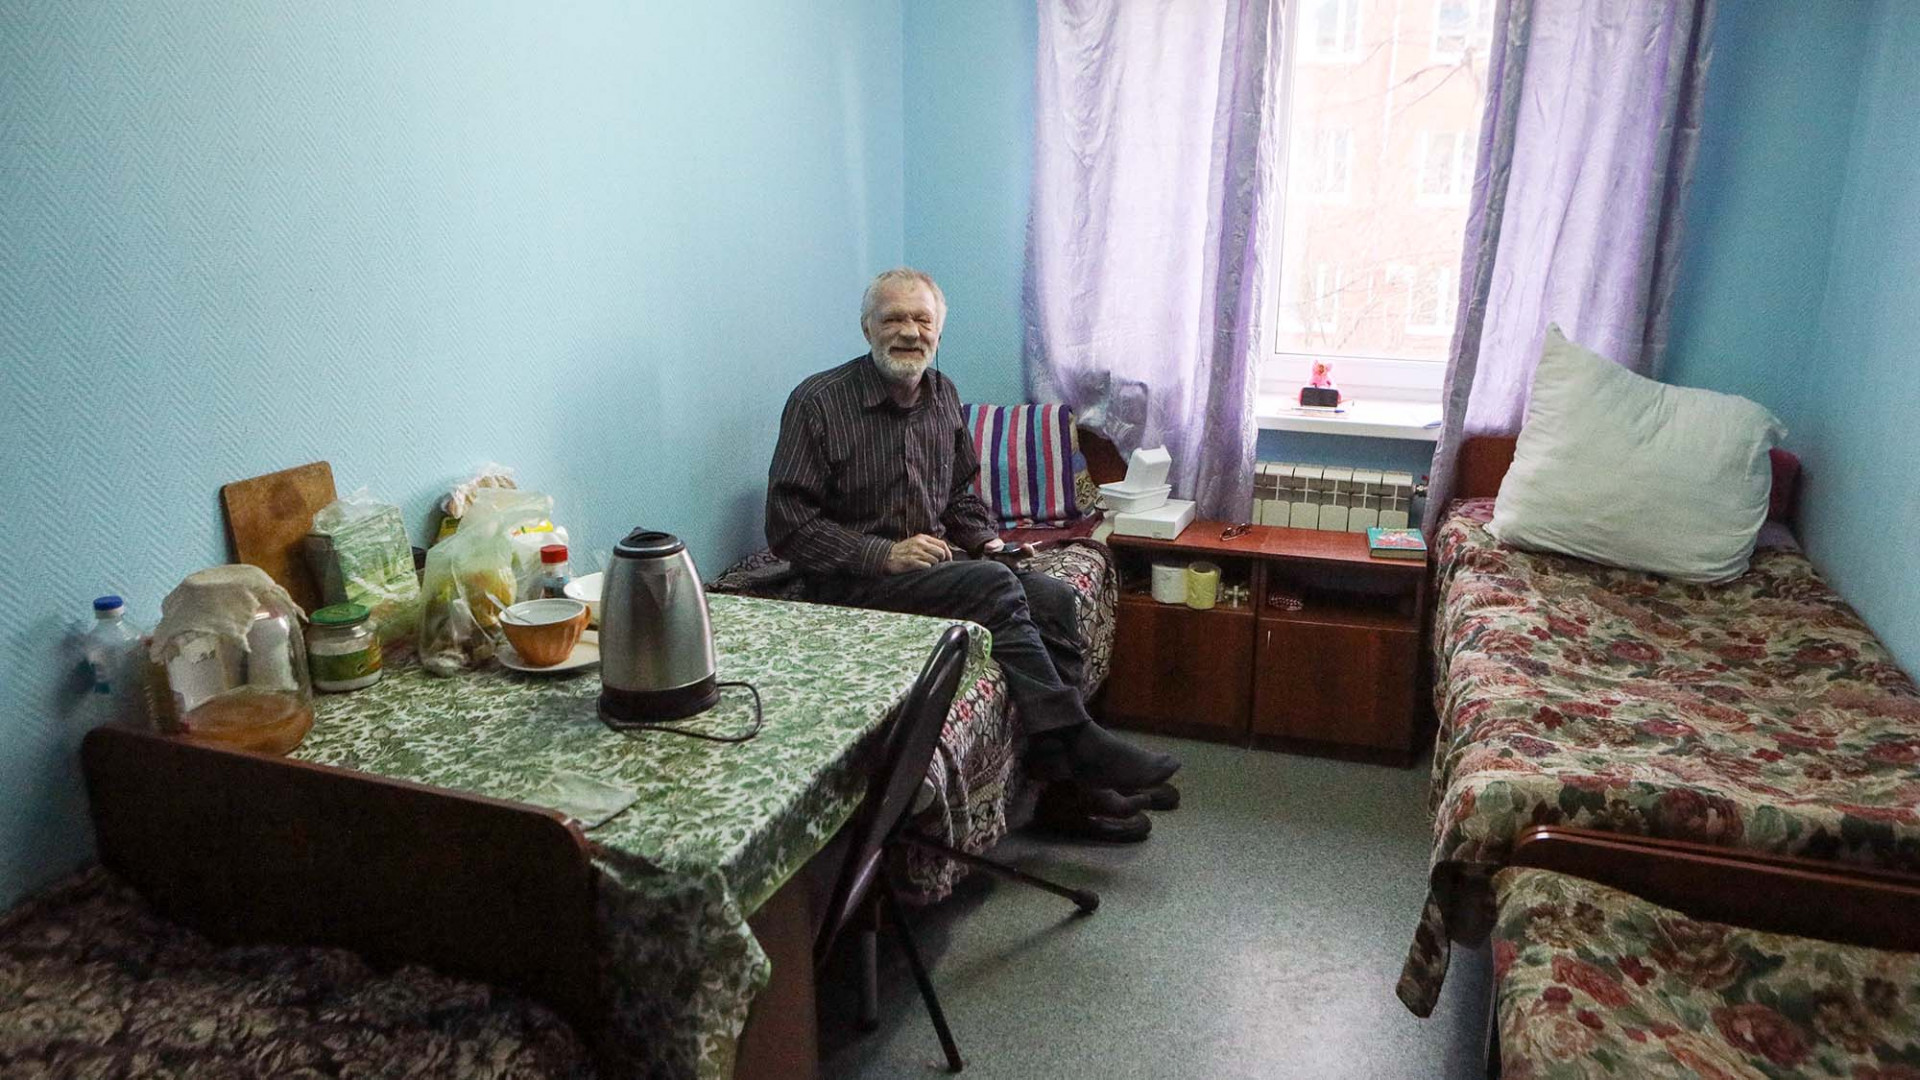 In Photos The Shelter That Helps Moscow's Homeless Bounce Back The